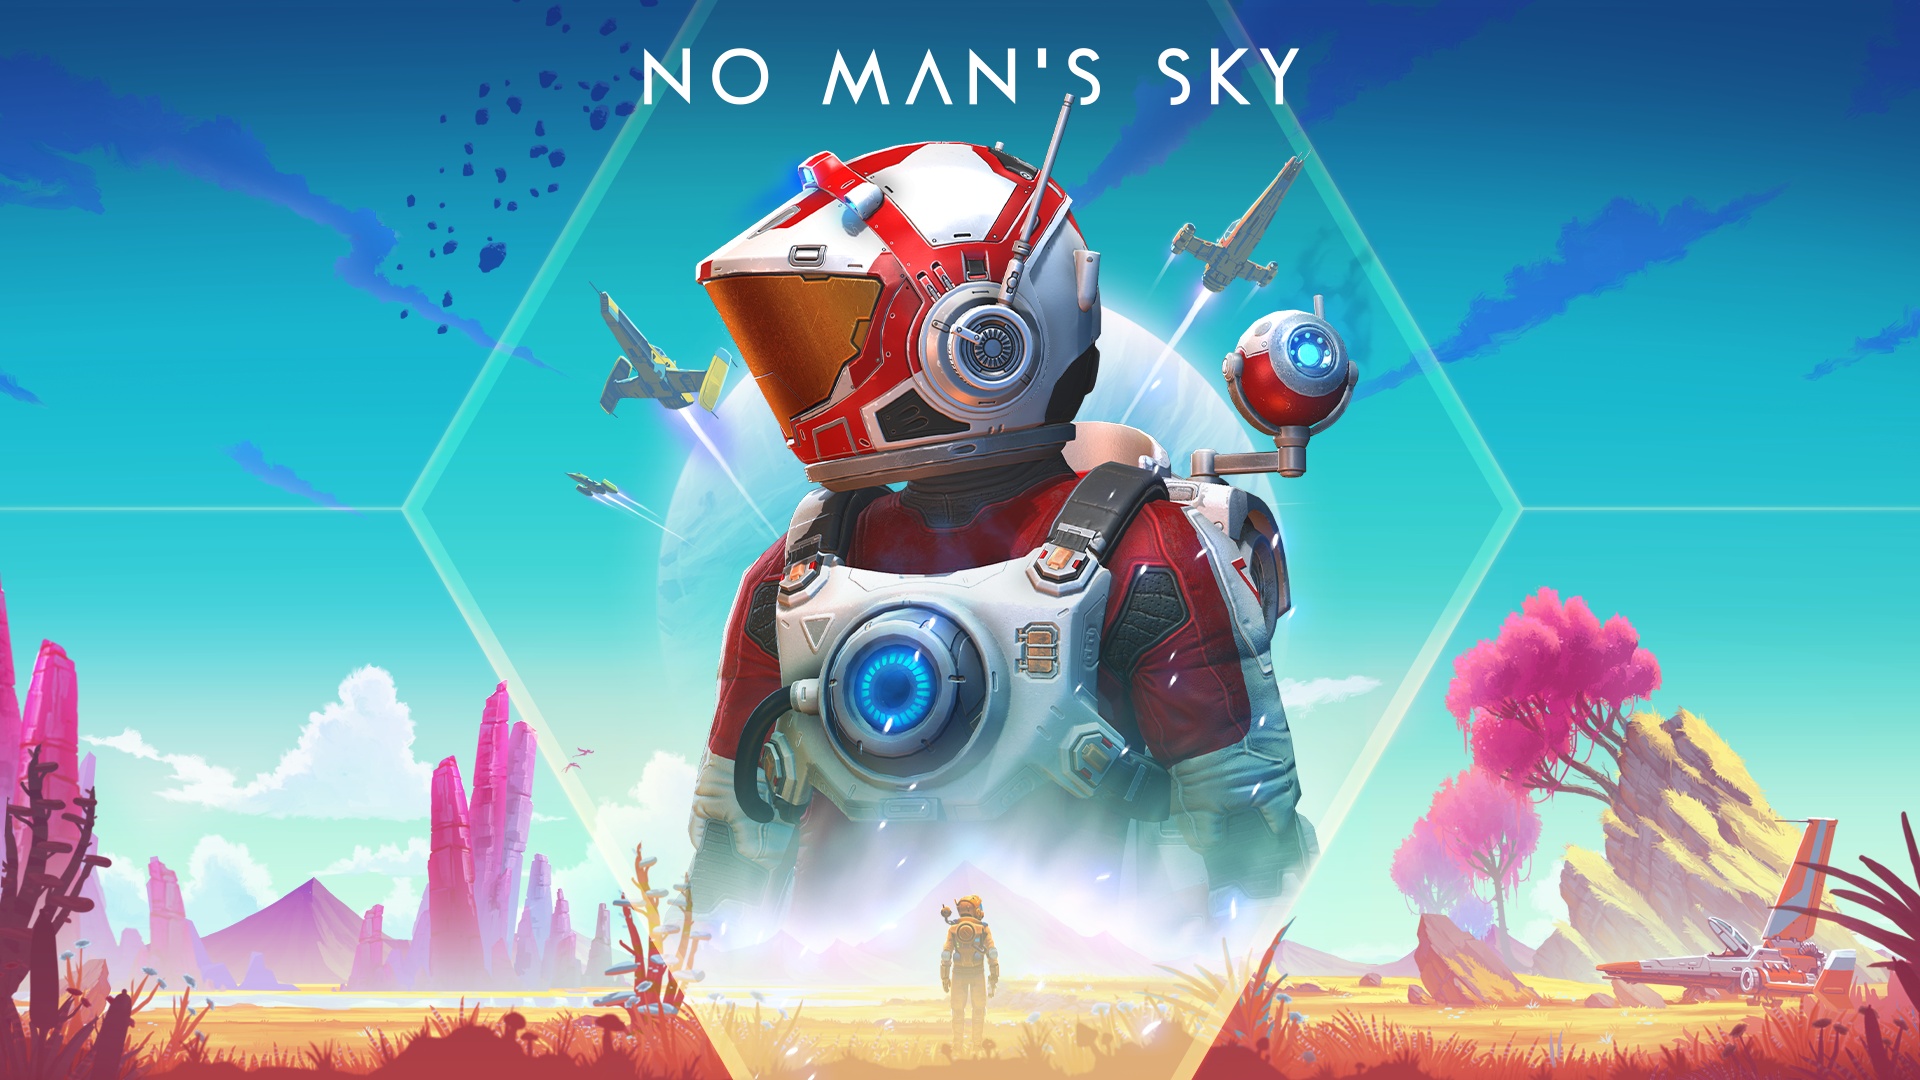 A New Era of No Man's Sky Starts Today with the Waypoint Update